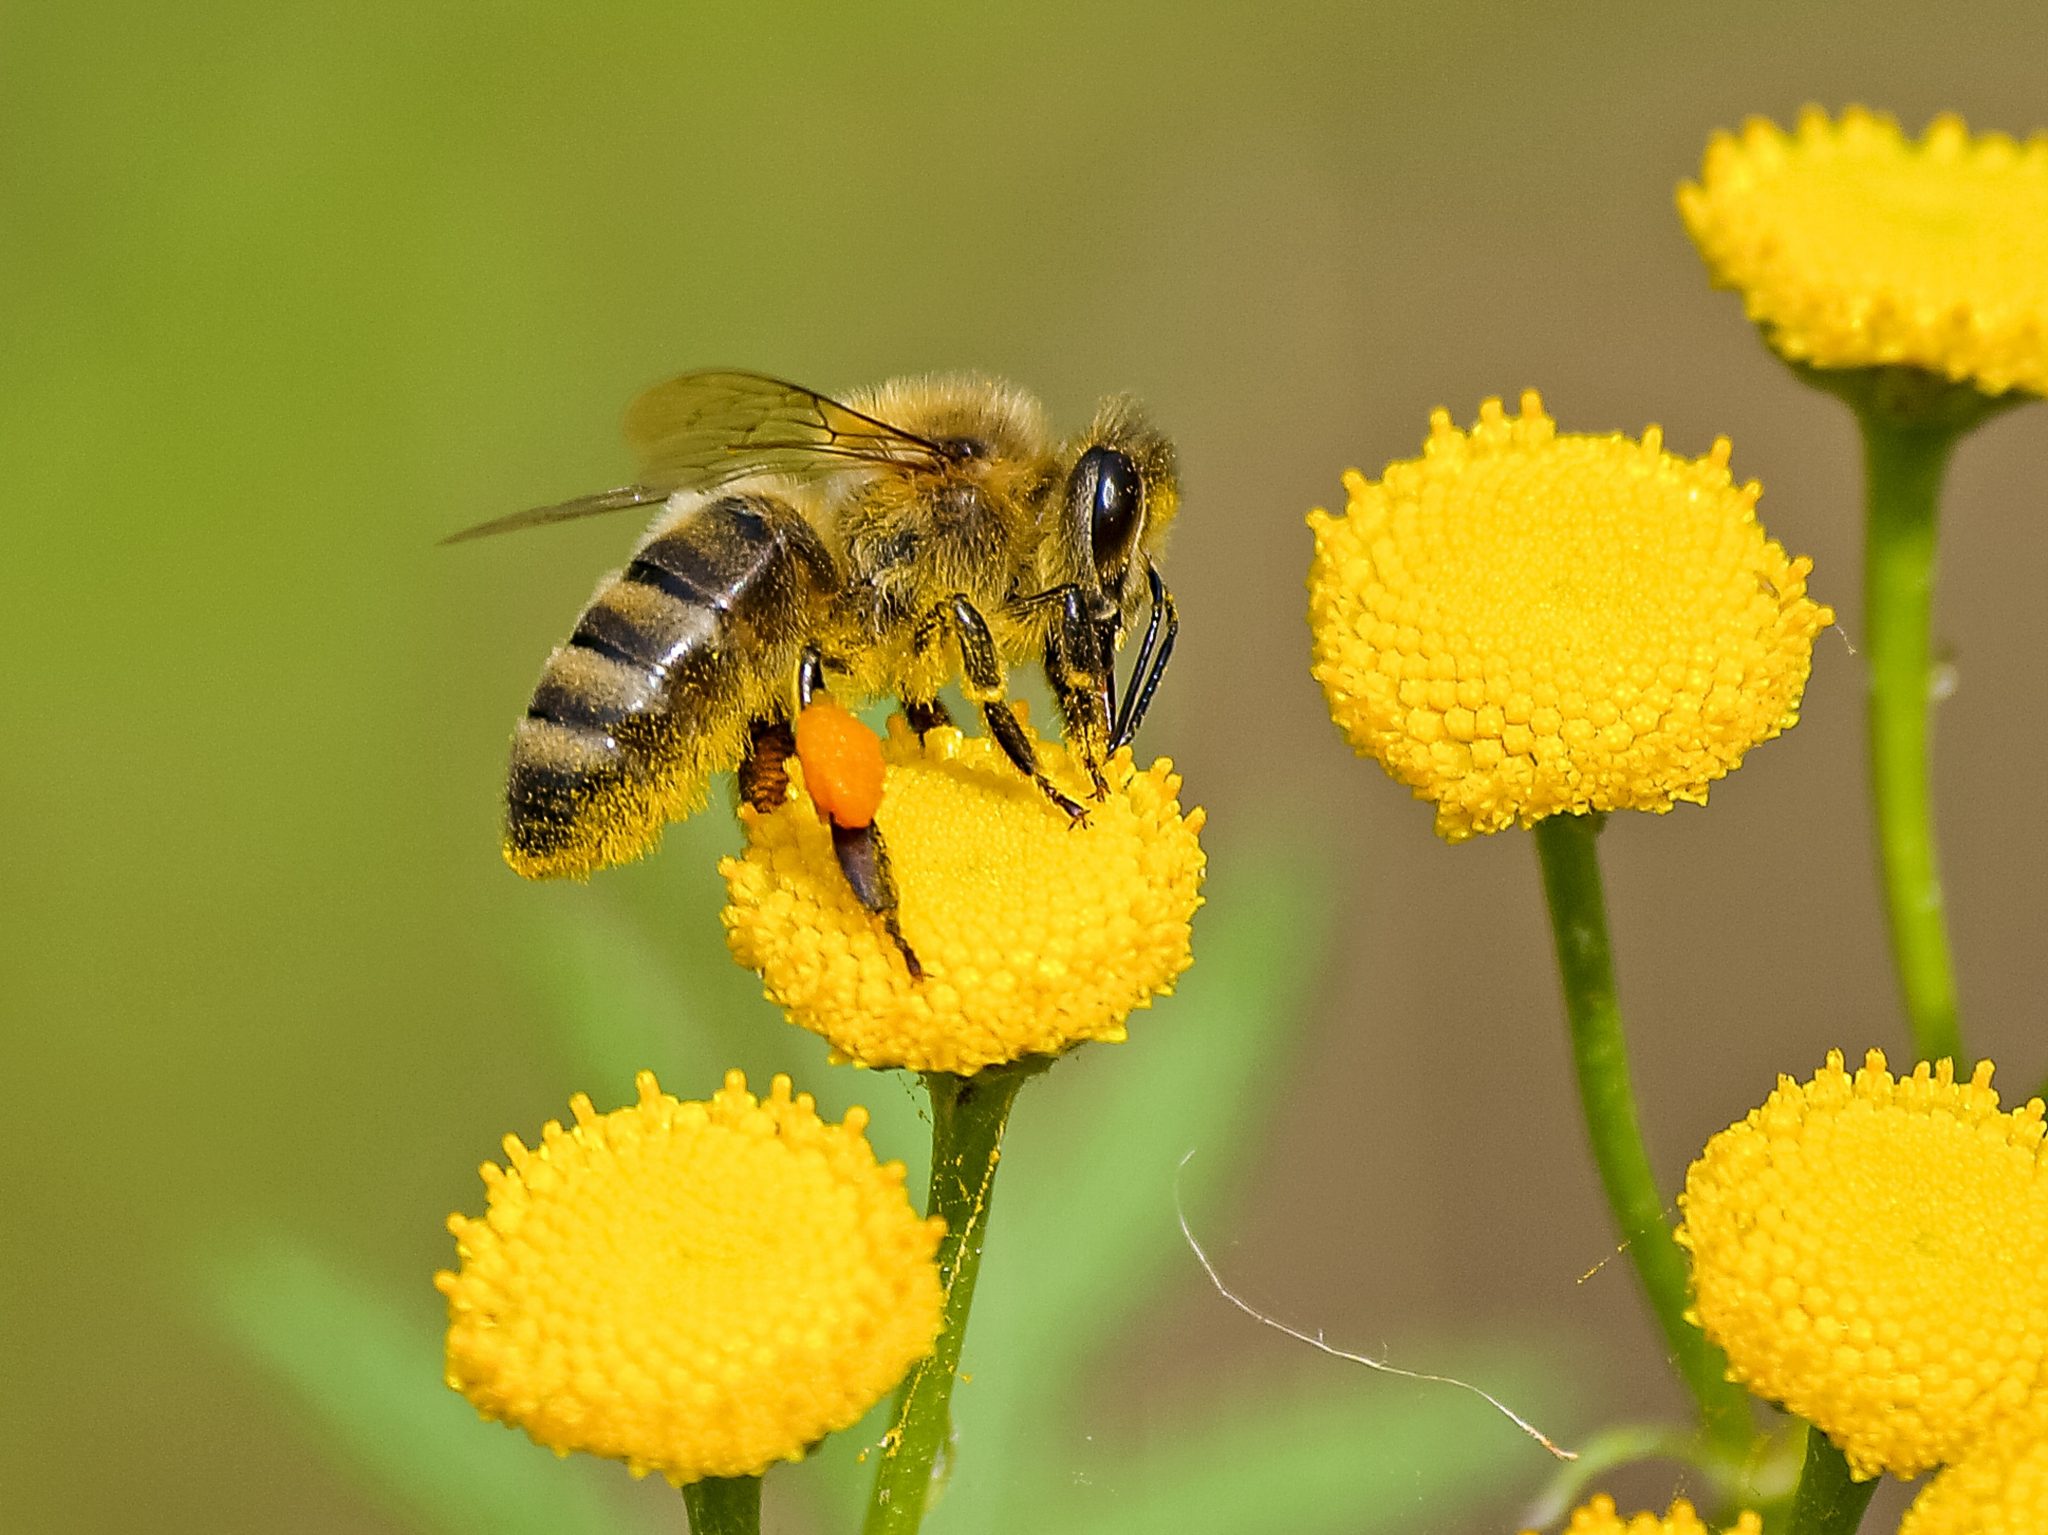 Learn why bees and the pollination process is so important!